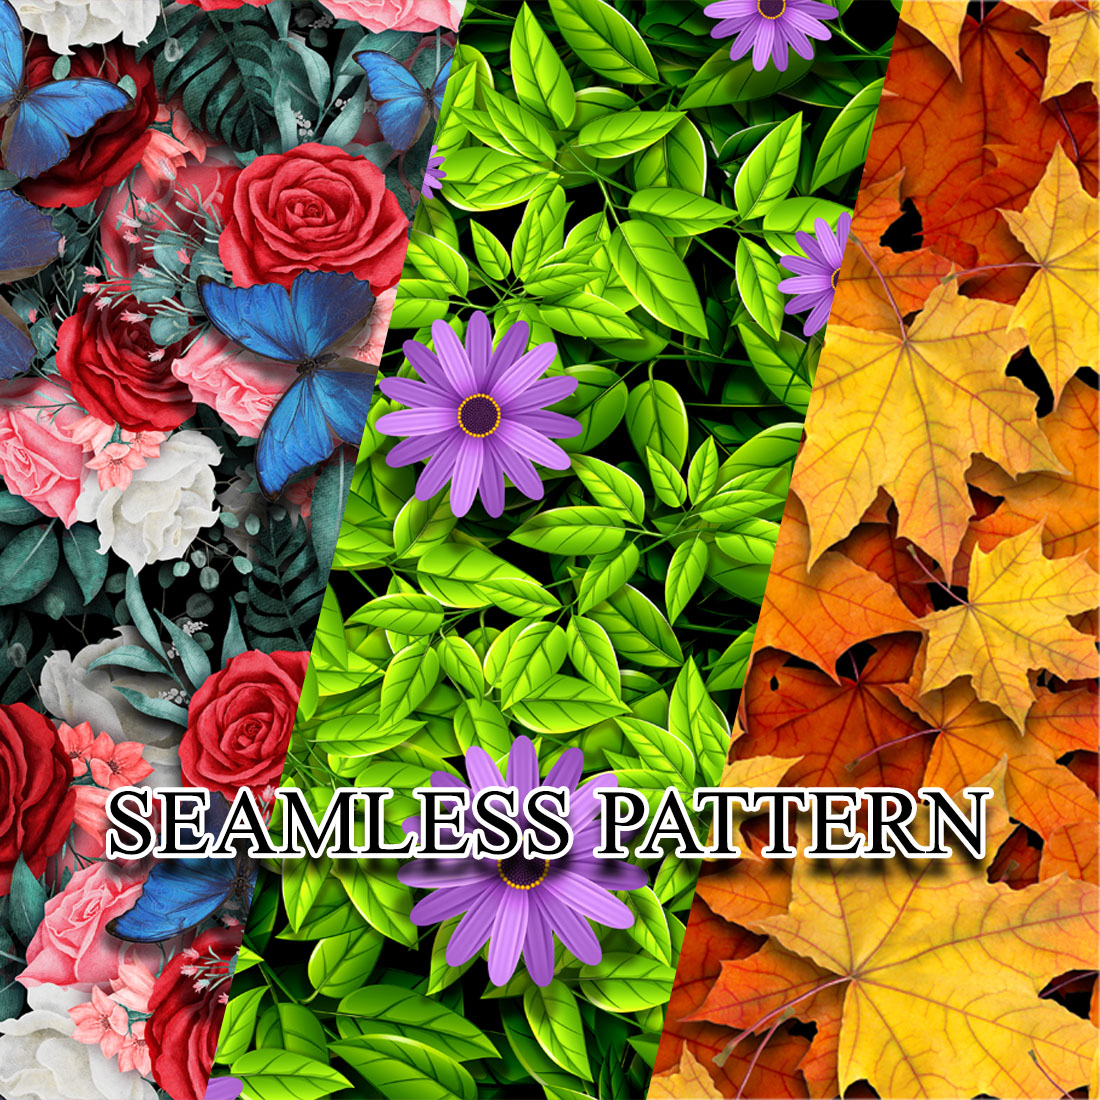 Flower Leaf Seamless Pattern cover image.